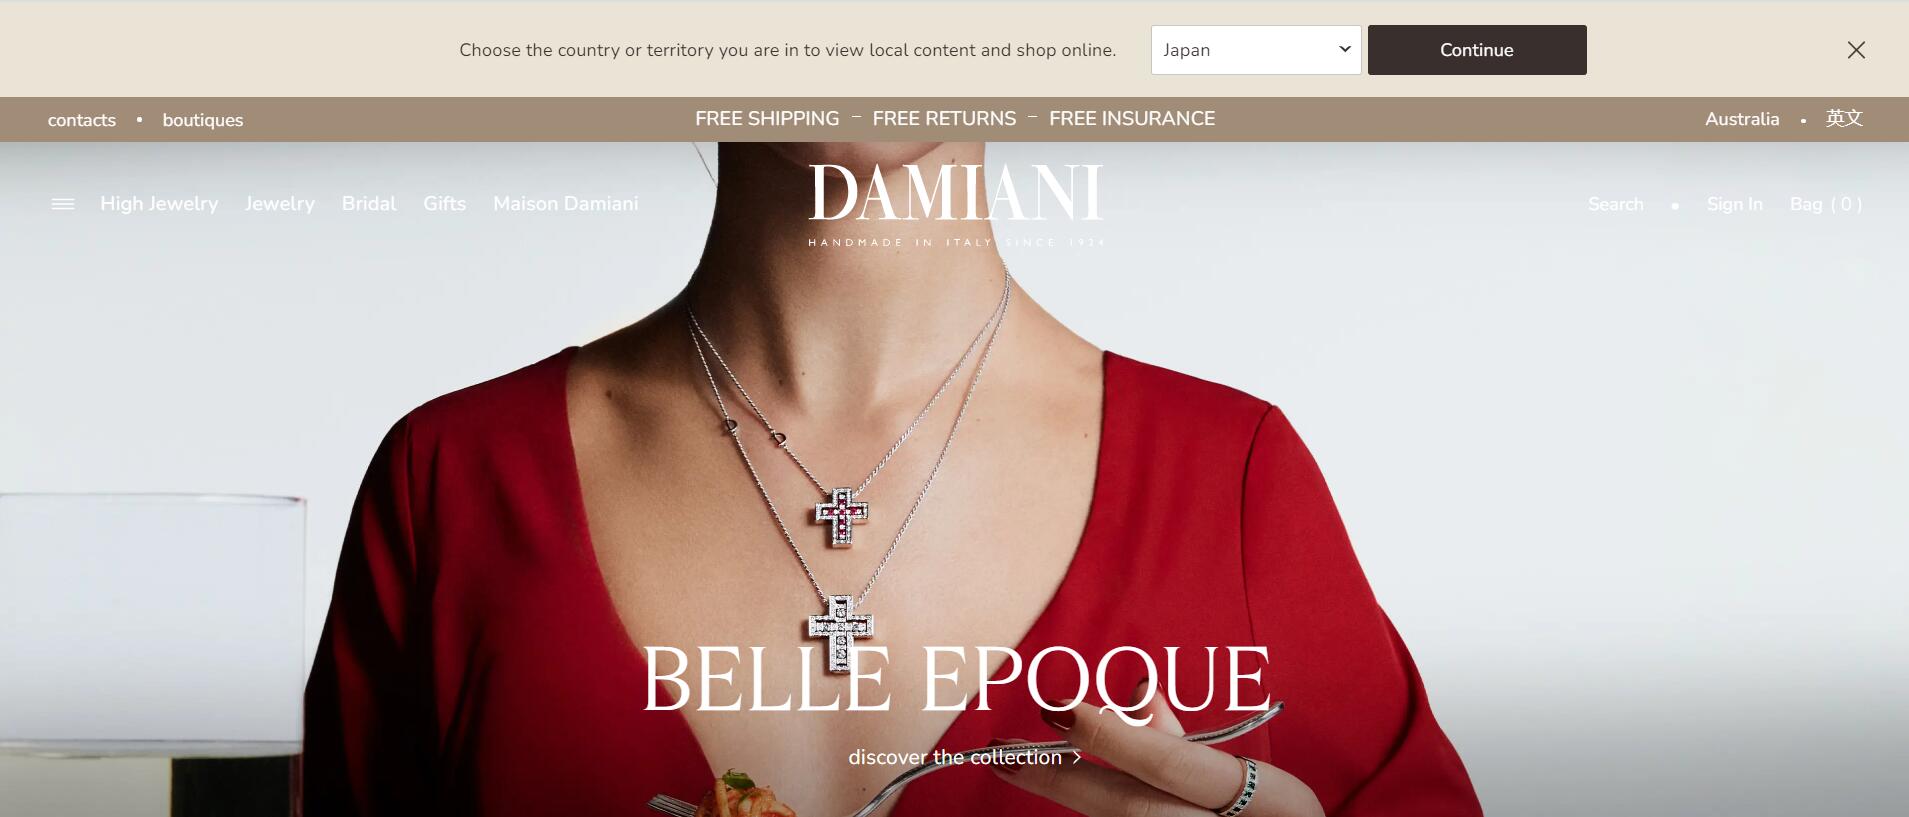 Damiani Grew its Turnover by 30% to €300 Million in FY 2022, with Plans for New Acquisitions in Manufacturing and Retail